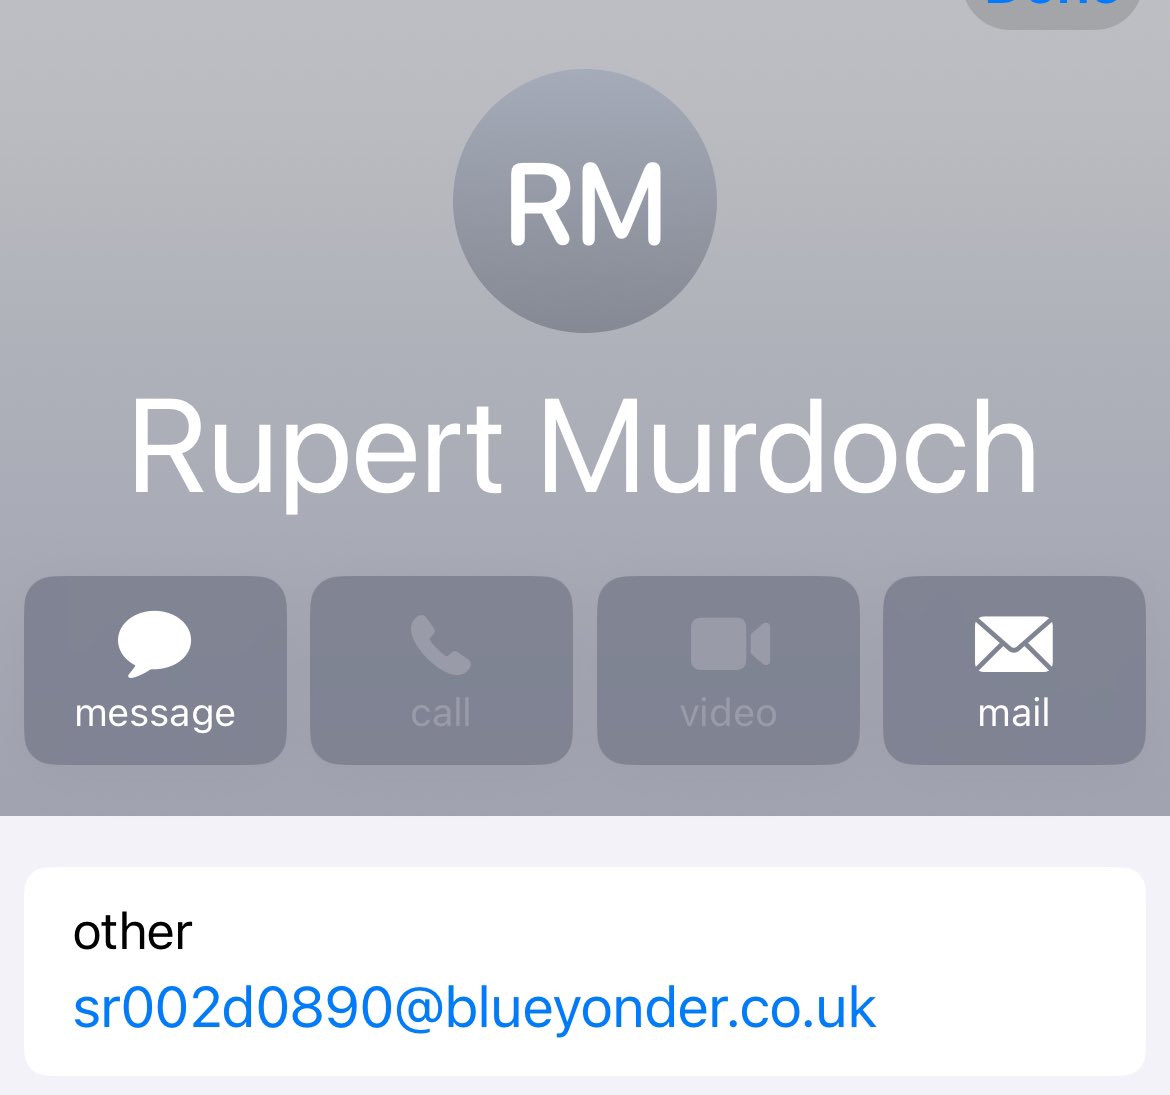 🧐 I’m not entirely convinced that Rupert Murdoch has a Blueyonder email account… [Still, a moderately sophisticated scam to target you with one of your employers’ names]